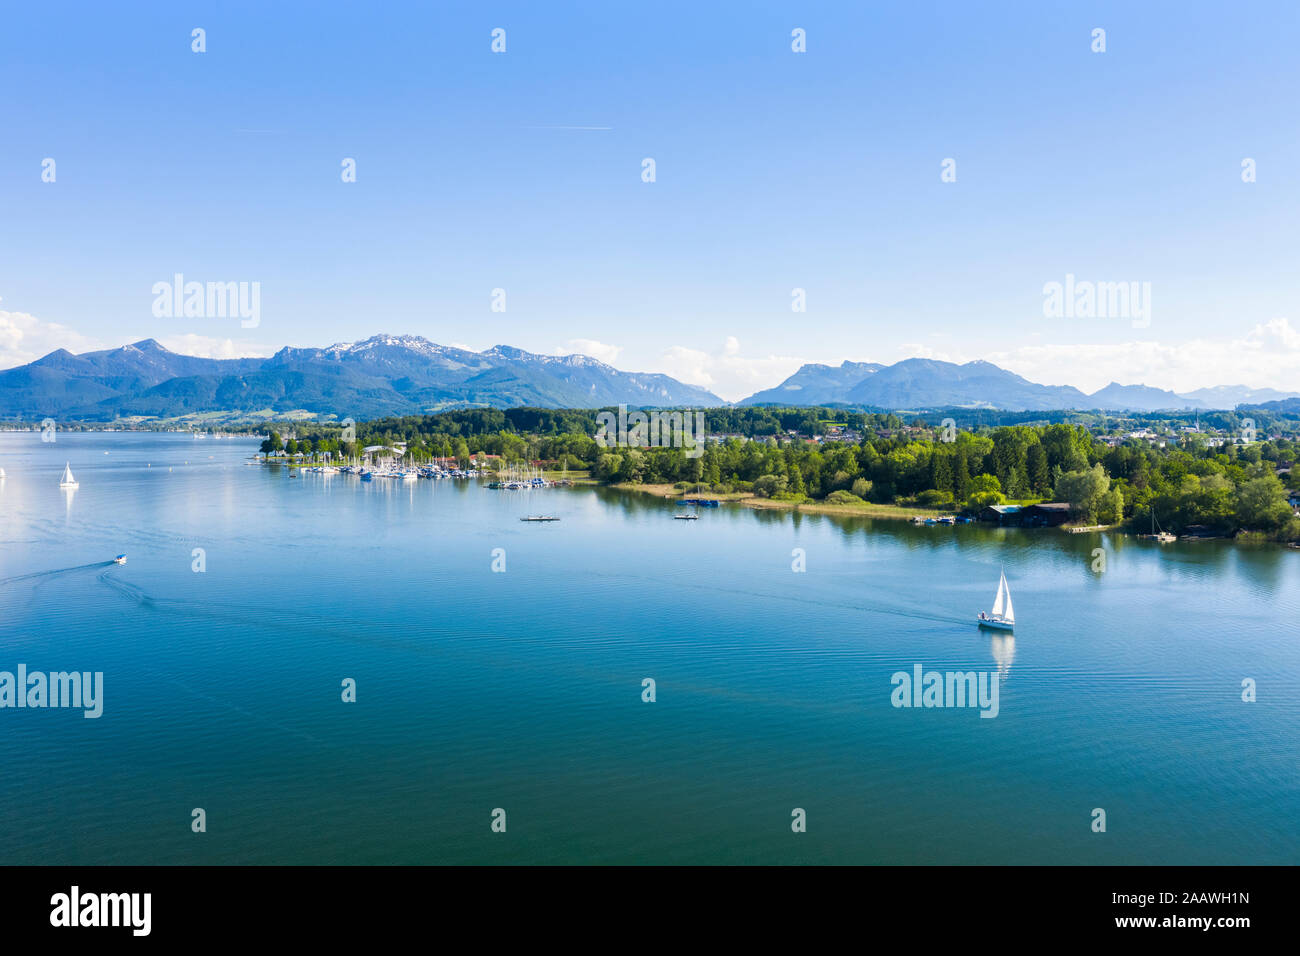 Germany, Bavaria, Prien am Chiemsee, Sailboats sailing near shore of Chiemsee lake with Chiemgau Alps in background Stock Photo